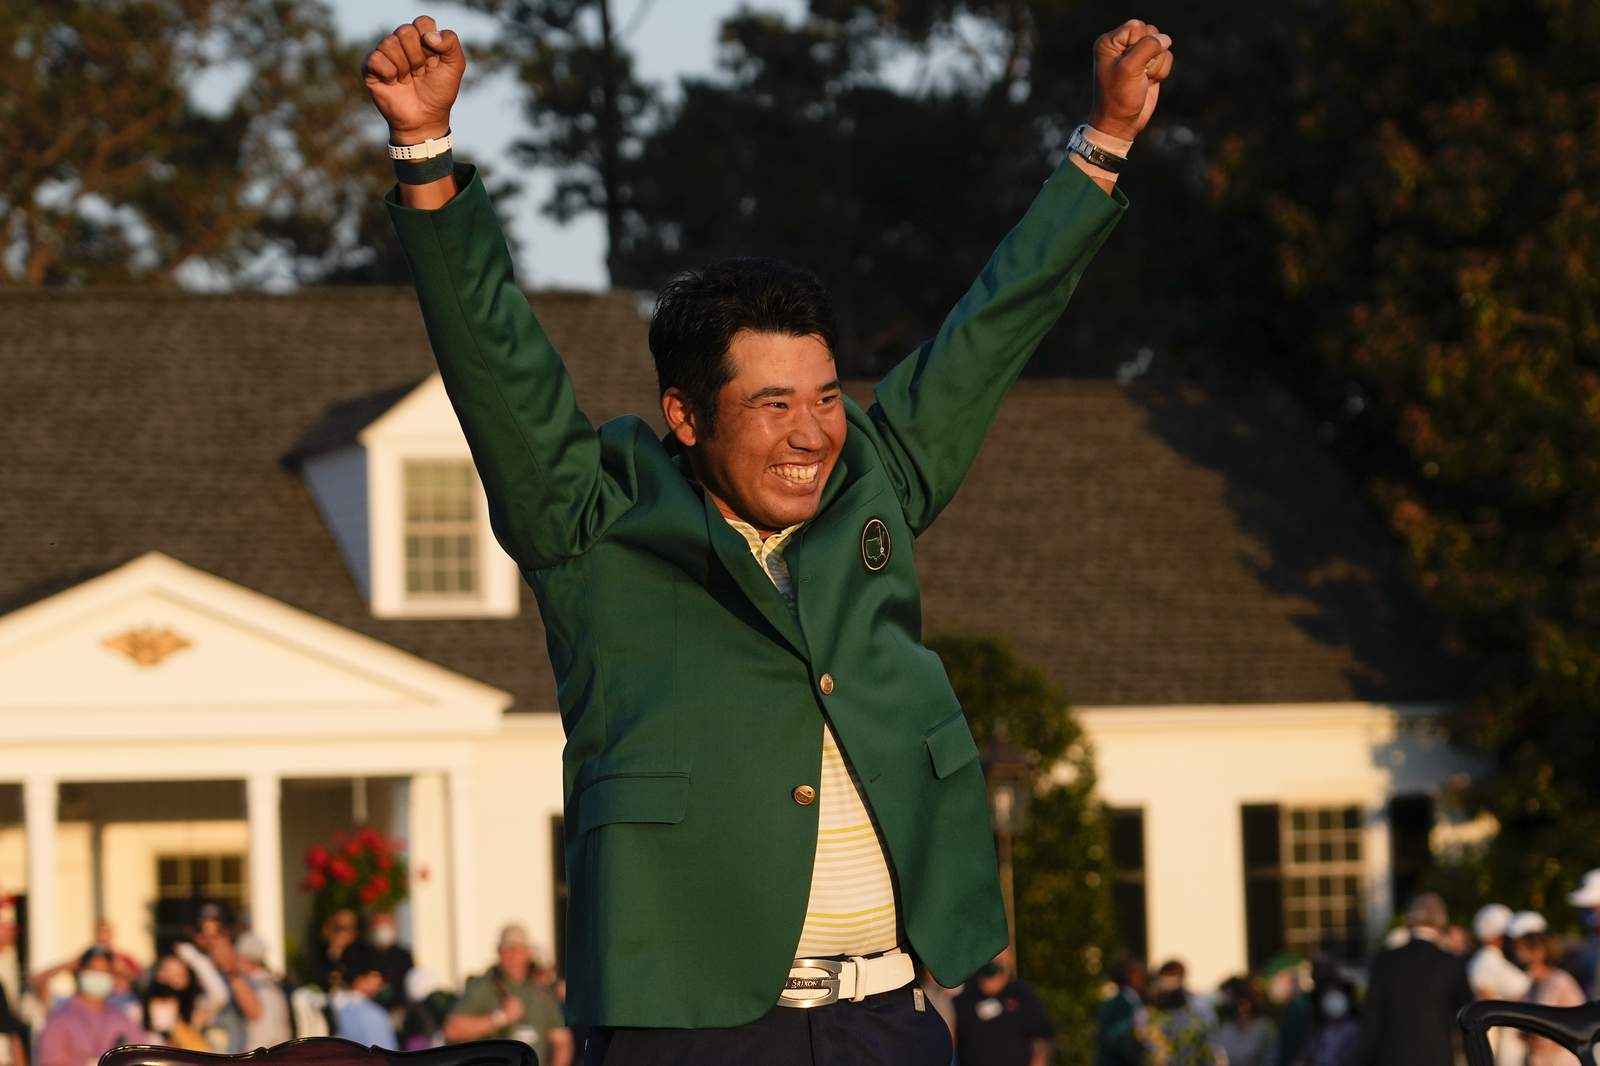 The Latest: Matsuyama hopes to be pioneer for Japanese golf